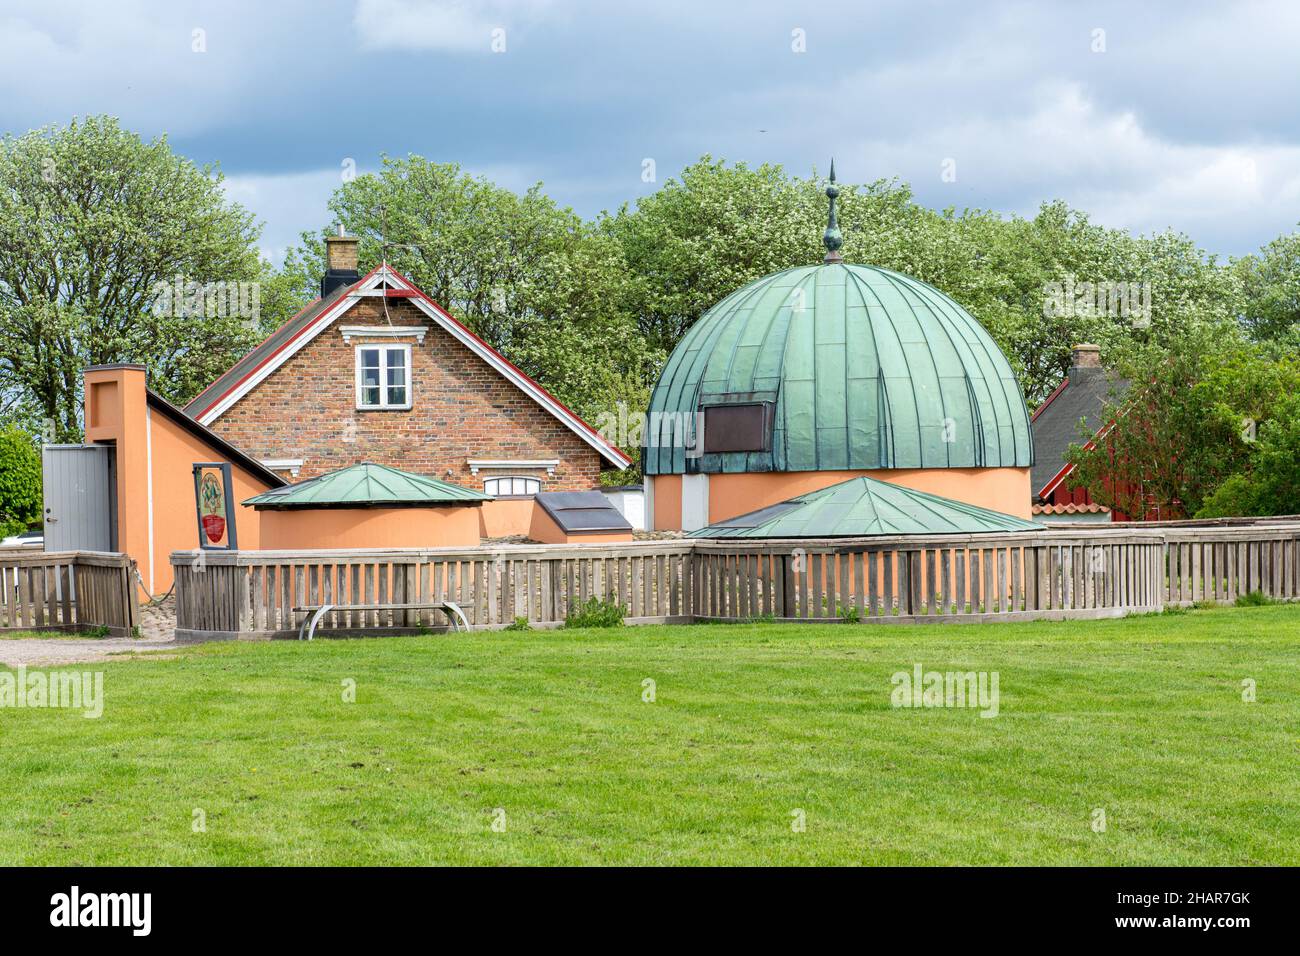 Tycho Brahe observatory on the island Ven in Sweden as seen outdoor Stock Photo